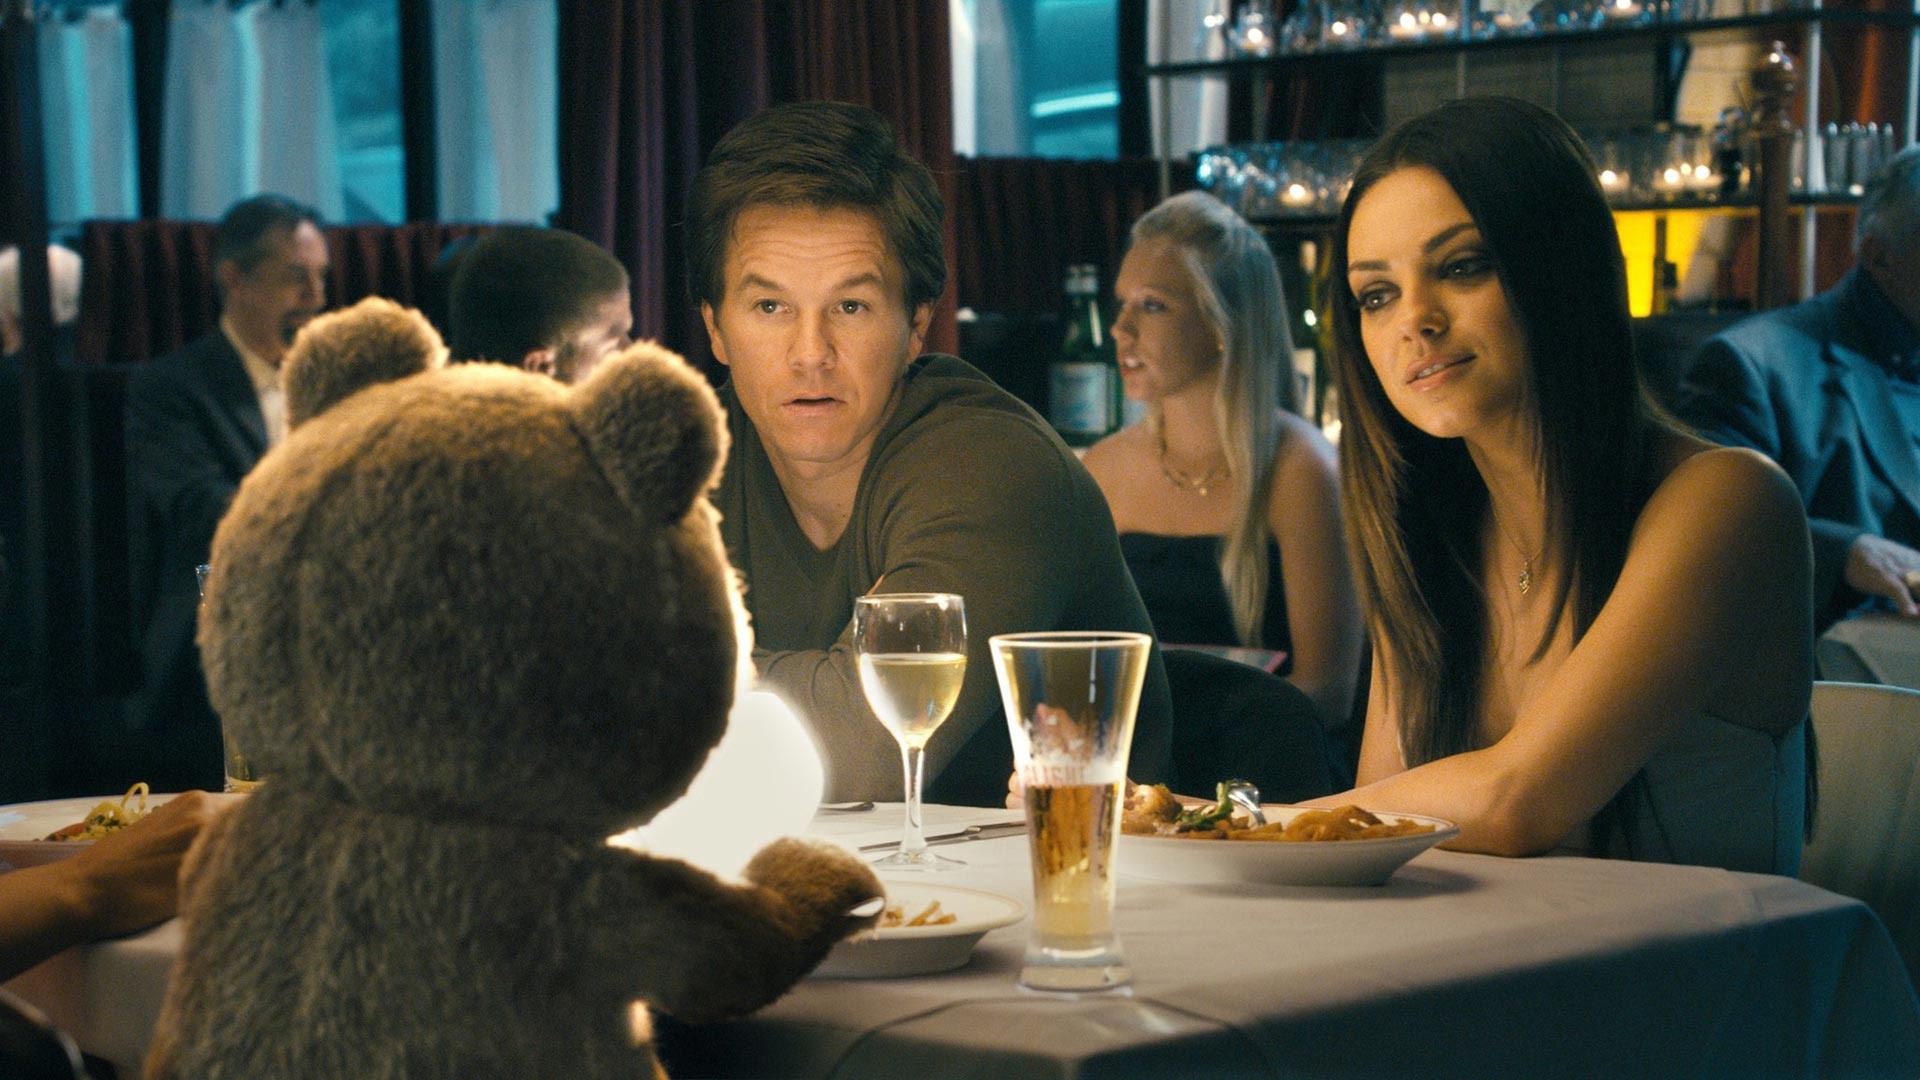 Ted 2012 HD movie wallpapers #9 - 1920x1080